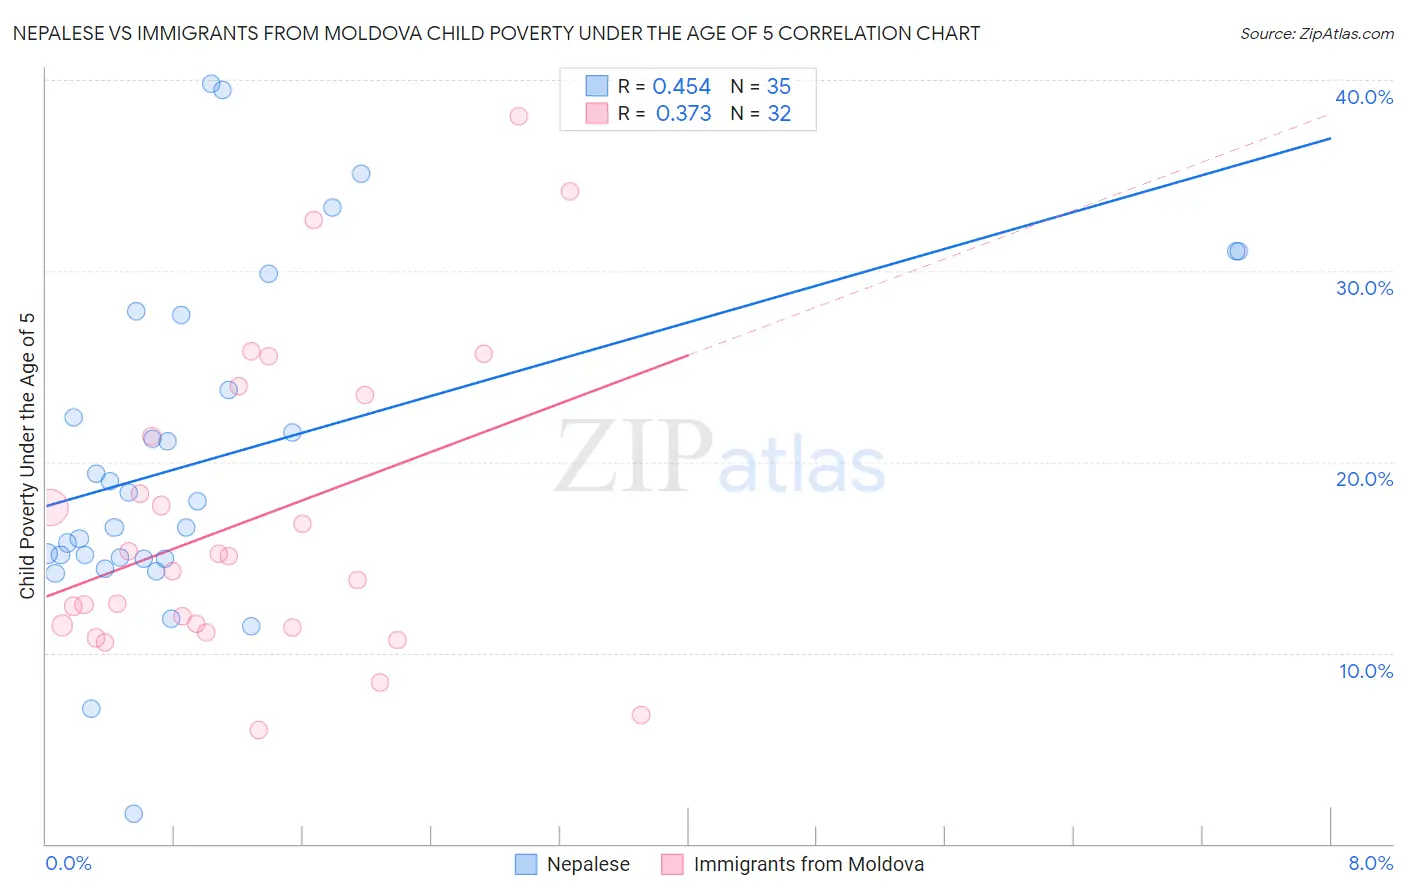 Nepalese vs Immigrants from Moldova Child Poverty Under the Age of 5